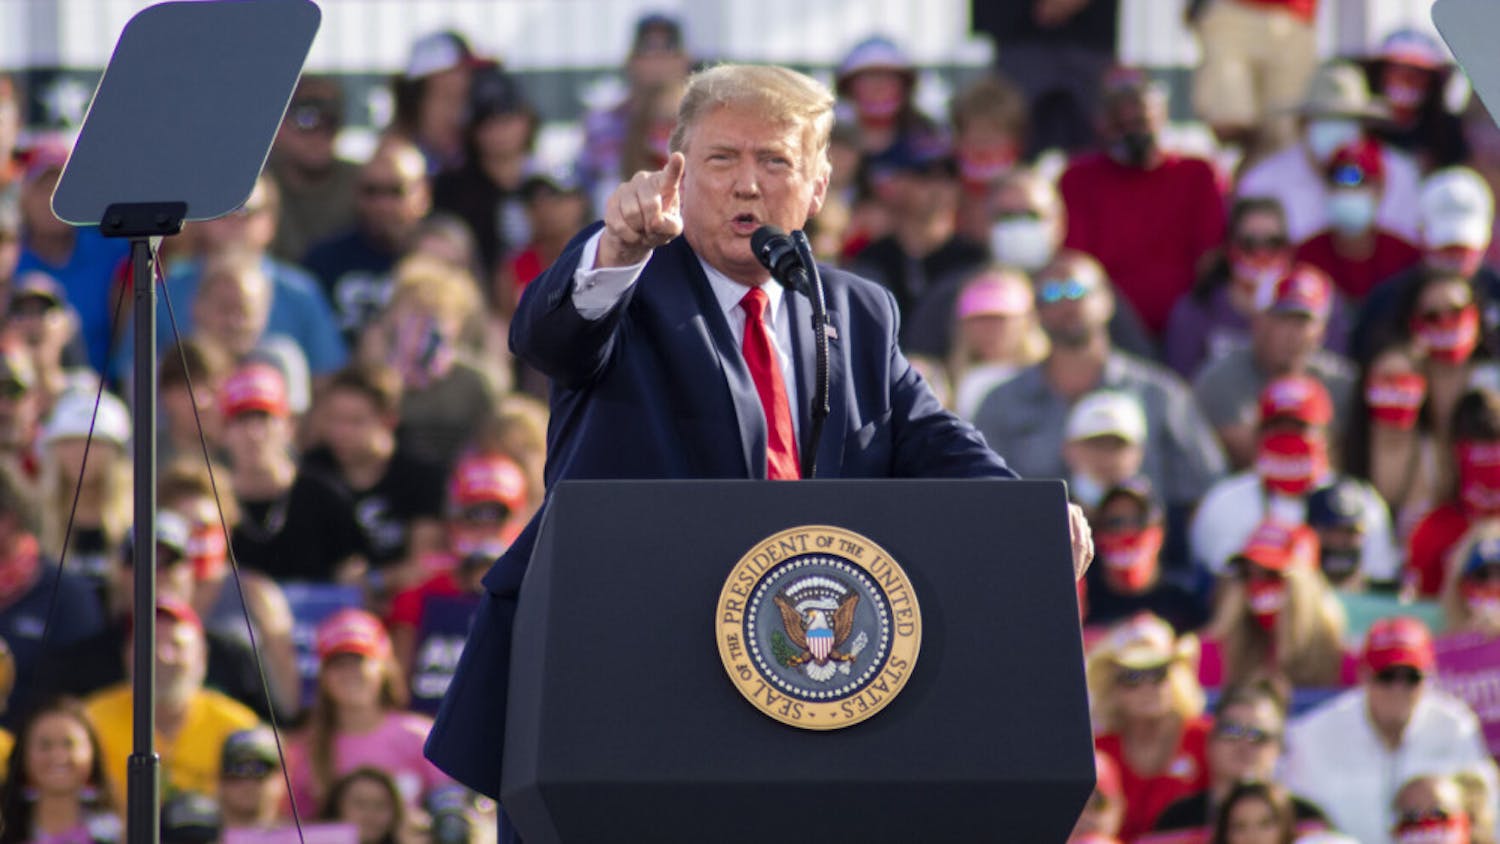 President Donald Trump is seen pointing his finger at the crowd during his campaing rally at the Ocala International Airport on Oct. 16, 2020. (Zachariah Chou/Alligator Staff)